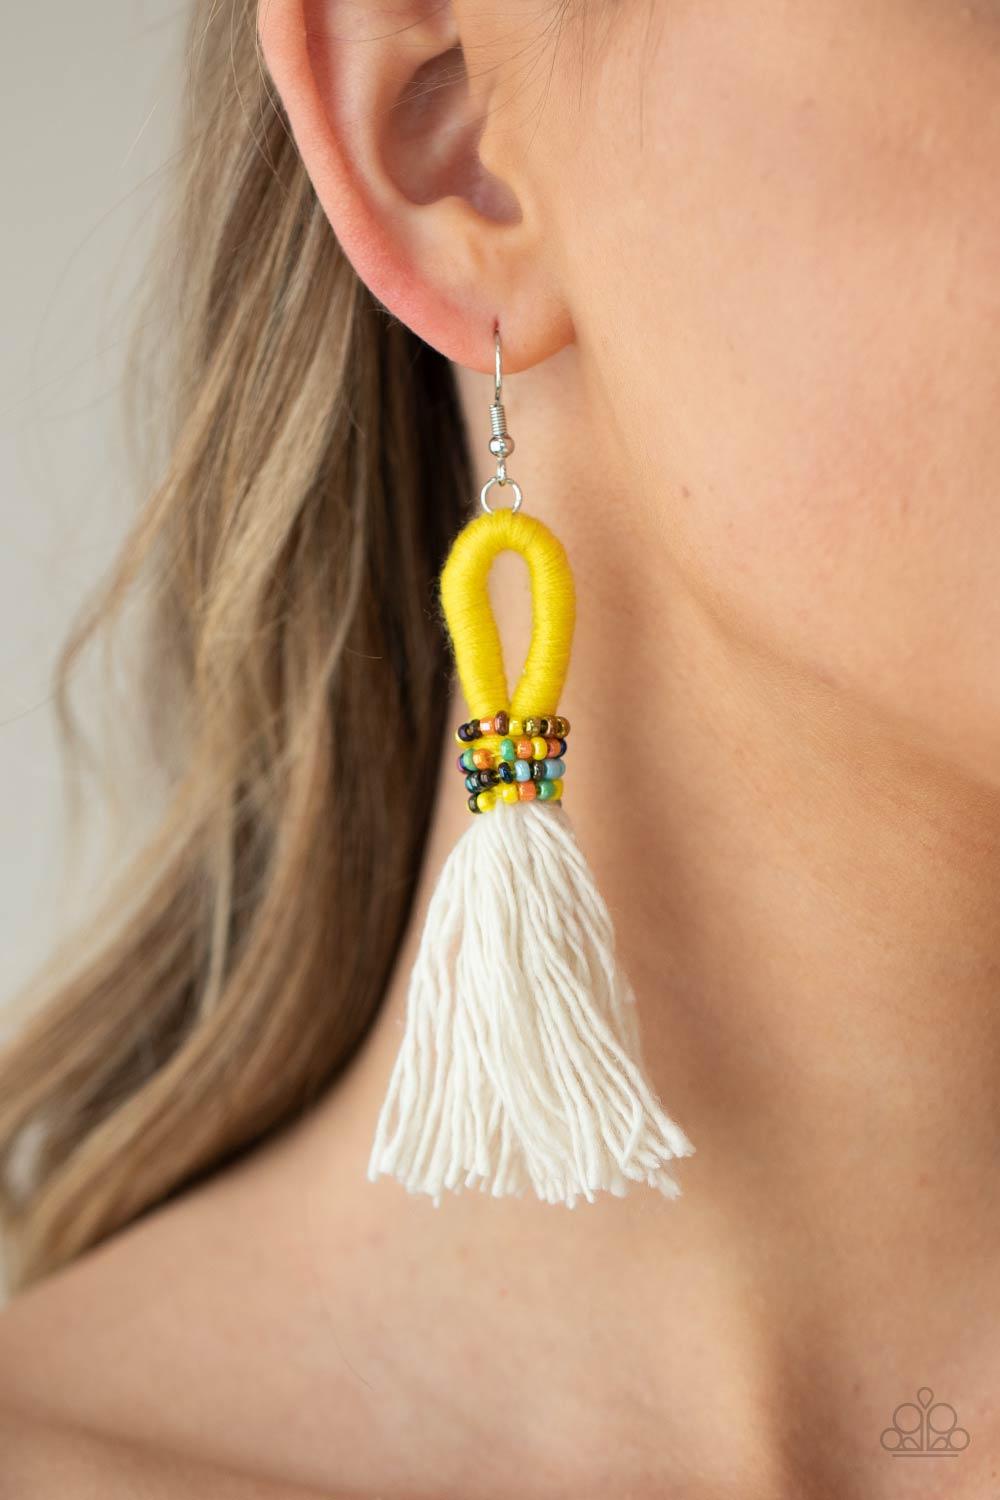 Paparazzi Accessories The Dustup - Yellow A tassel of soft white cotton fans out under rows of brightly colored seed beads. Anchored by a loop of vibrant yellow floss, the eye-catching style swings from the ear for a show-stopping statement. Earring attac